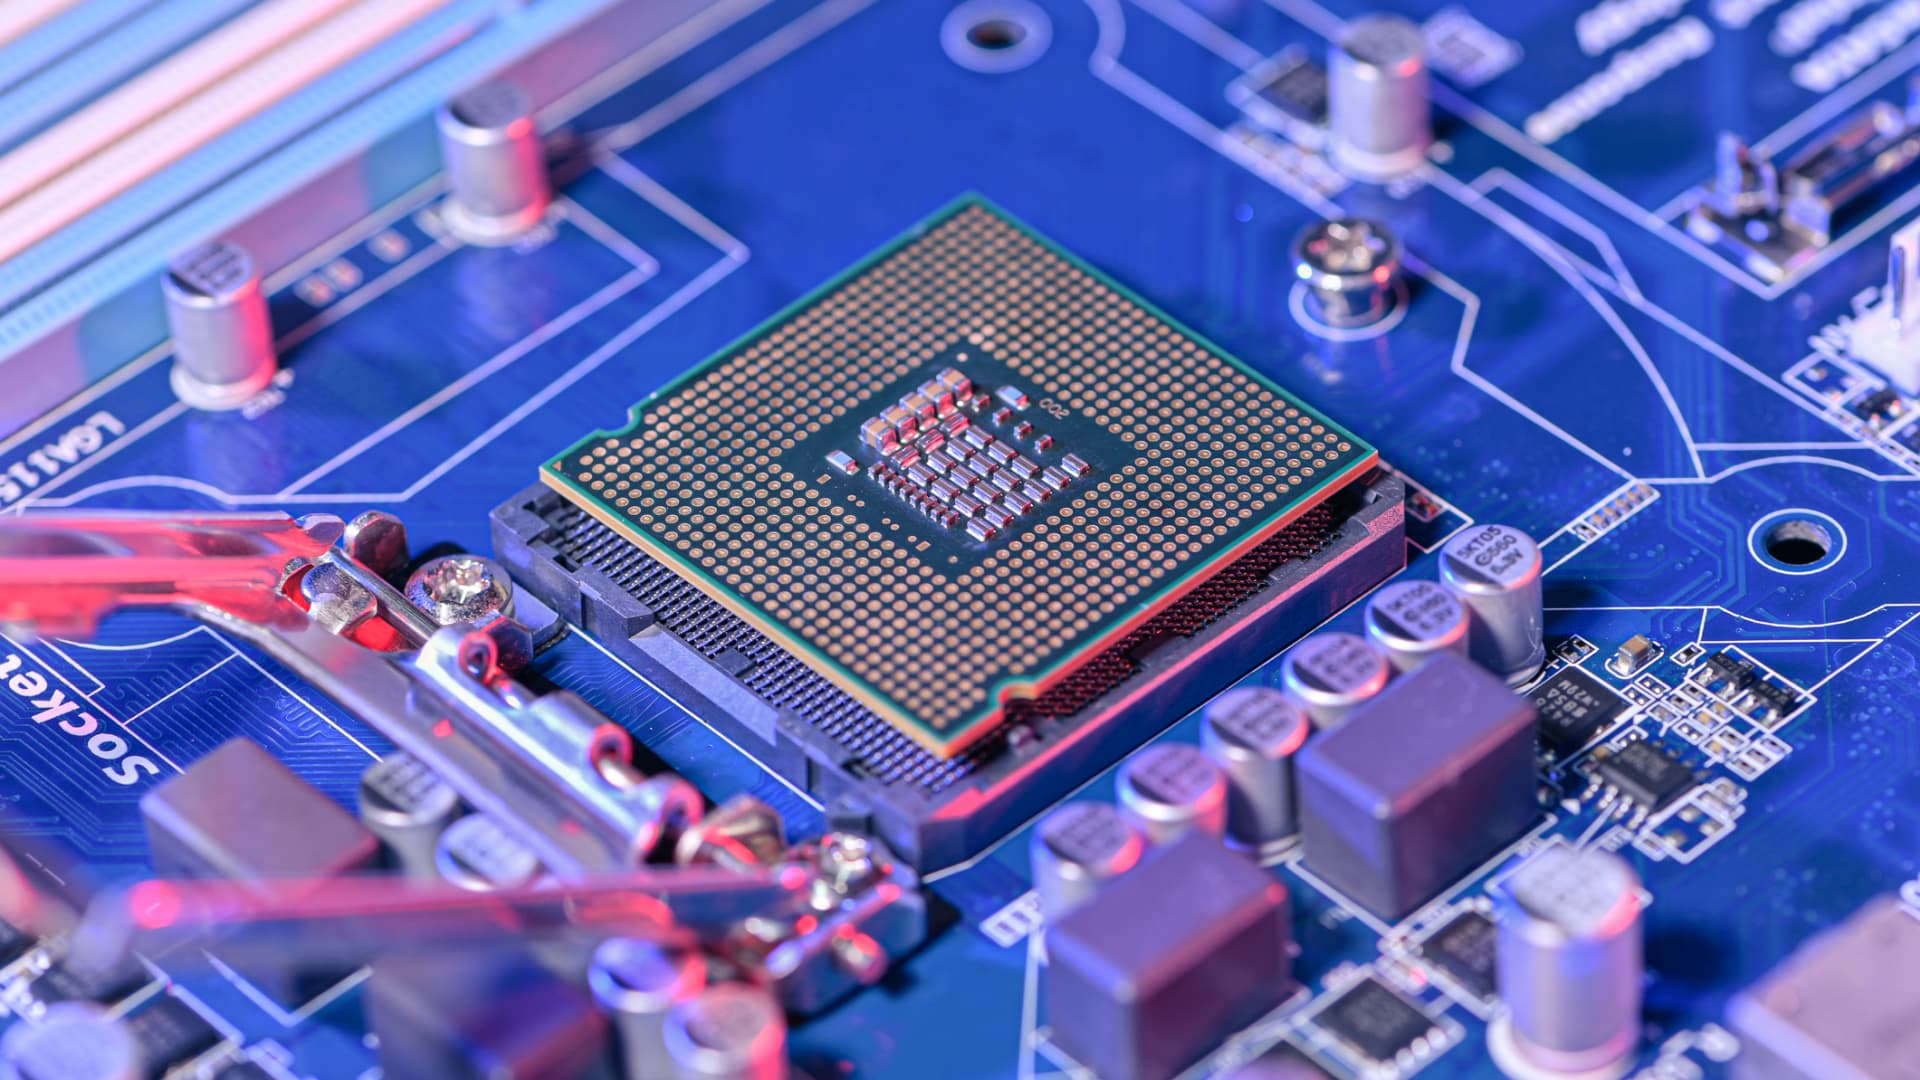 A close up image of a CPU socket and motherboard laying on the table.